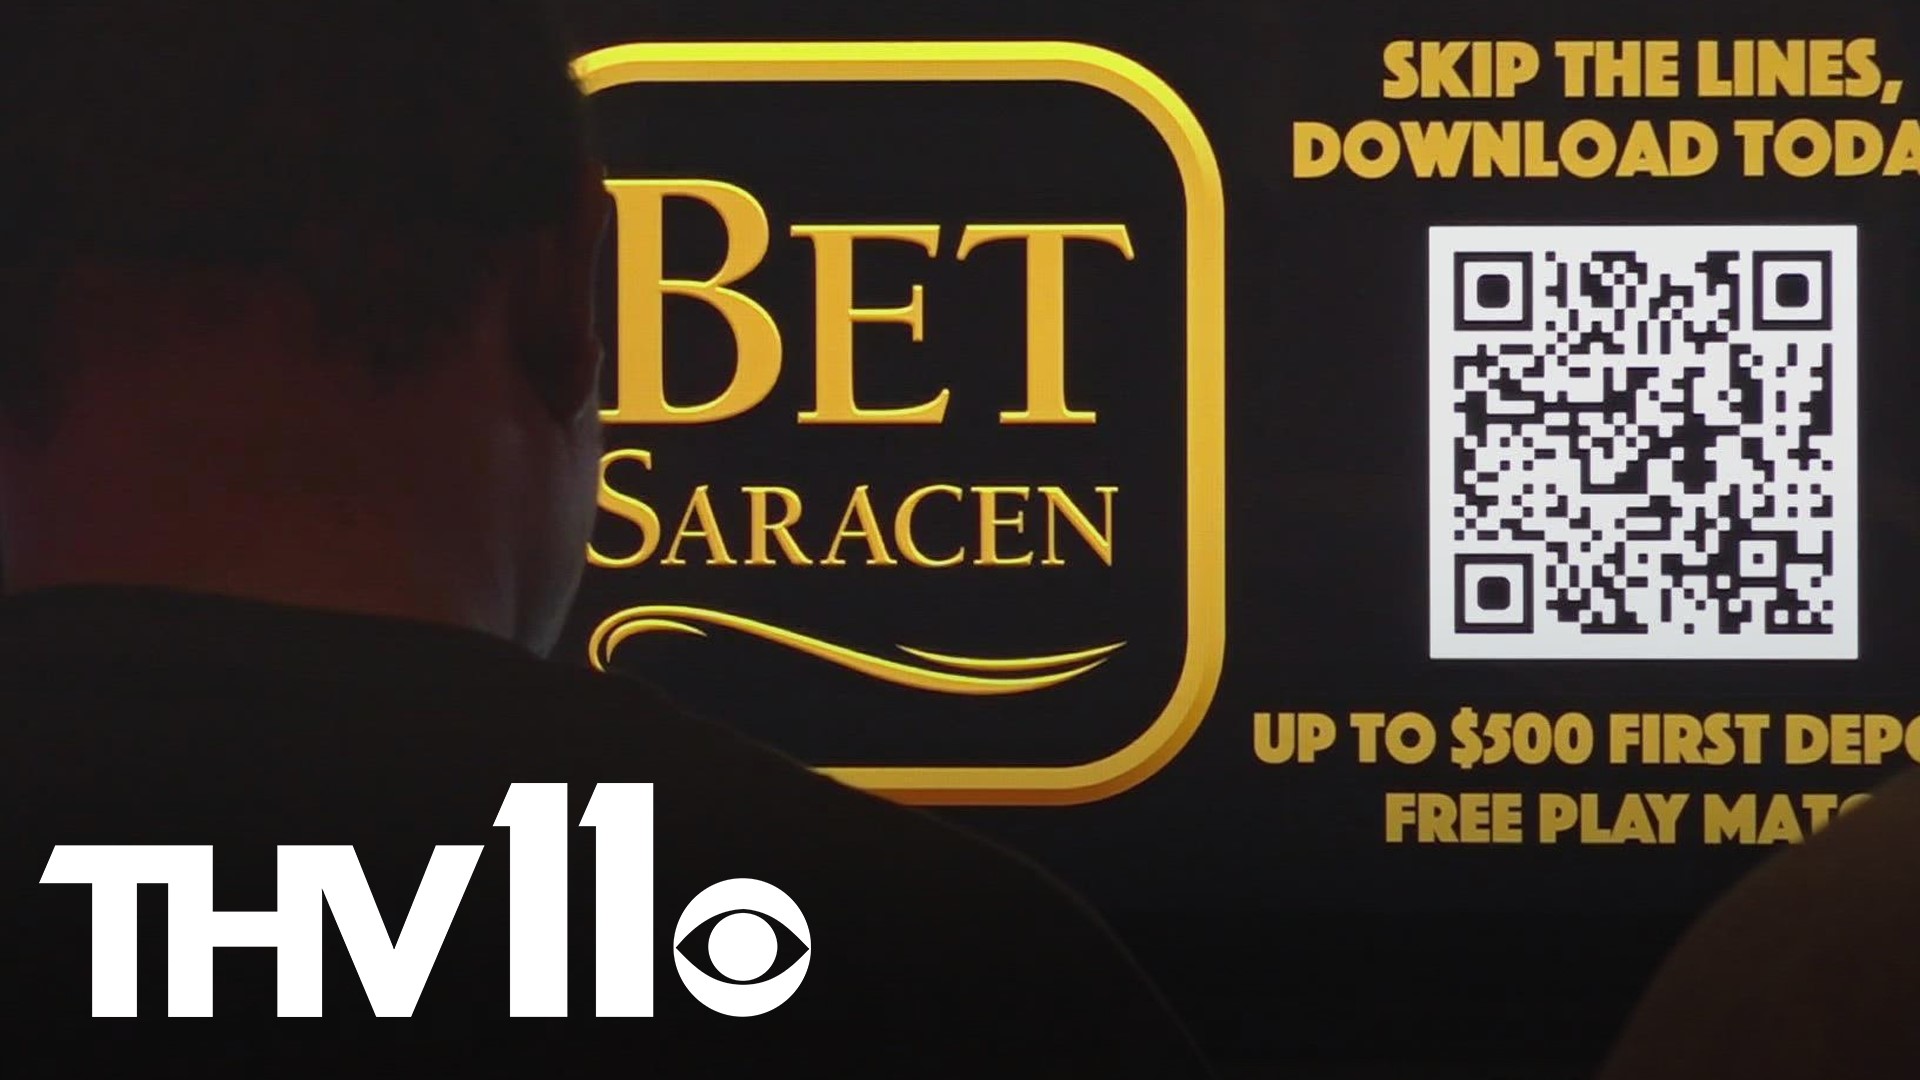 Saracen Casino launched its app today, two months after Arkansas legalized mobile sports betting.